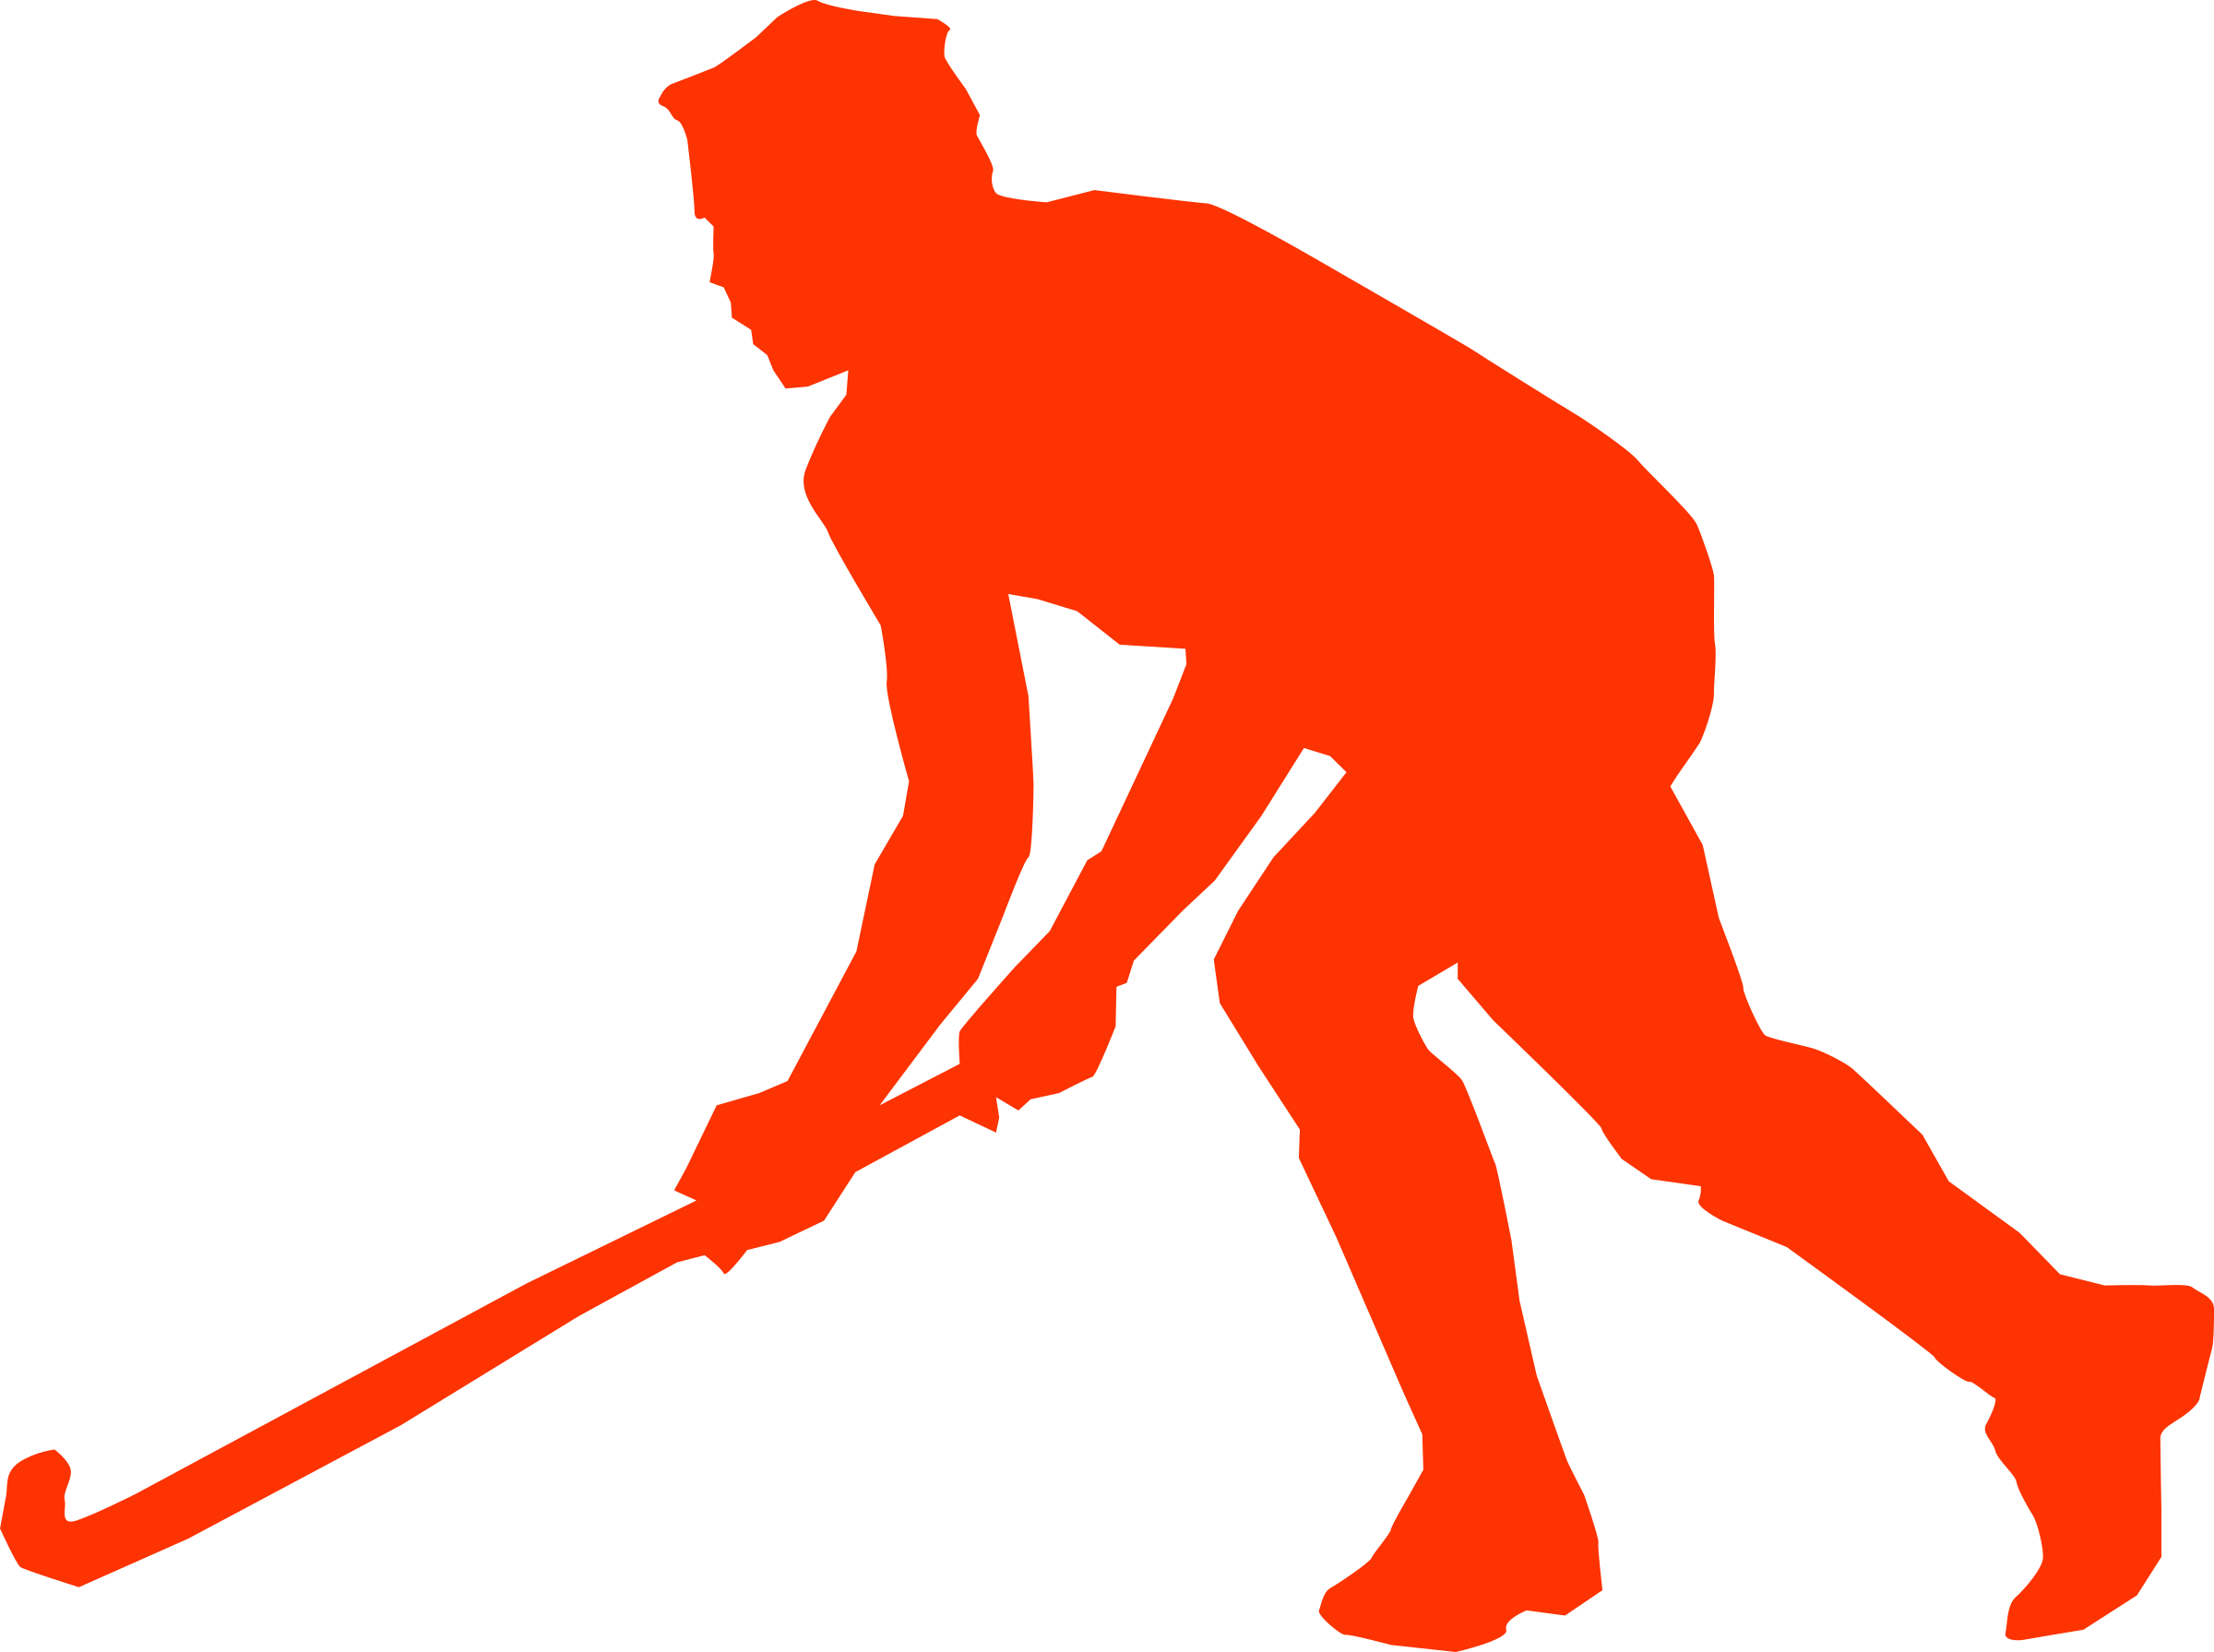 Big image png. Clipart grass hockey